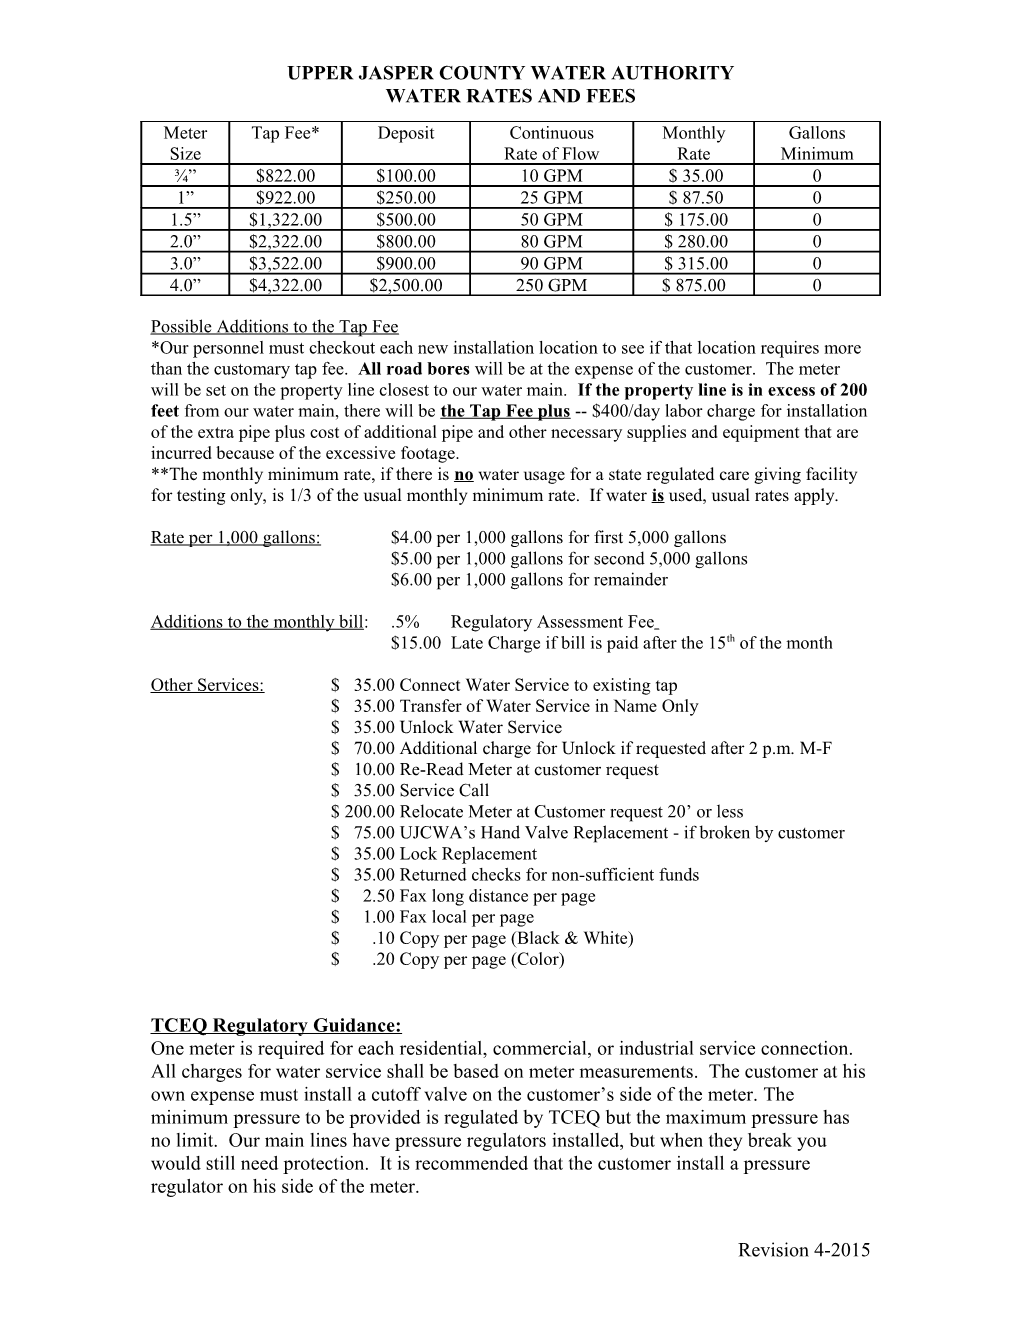 Water Rates and Fees